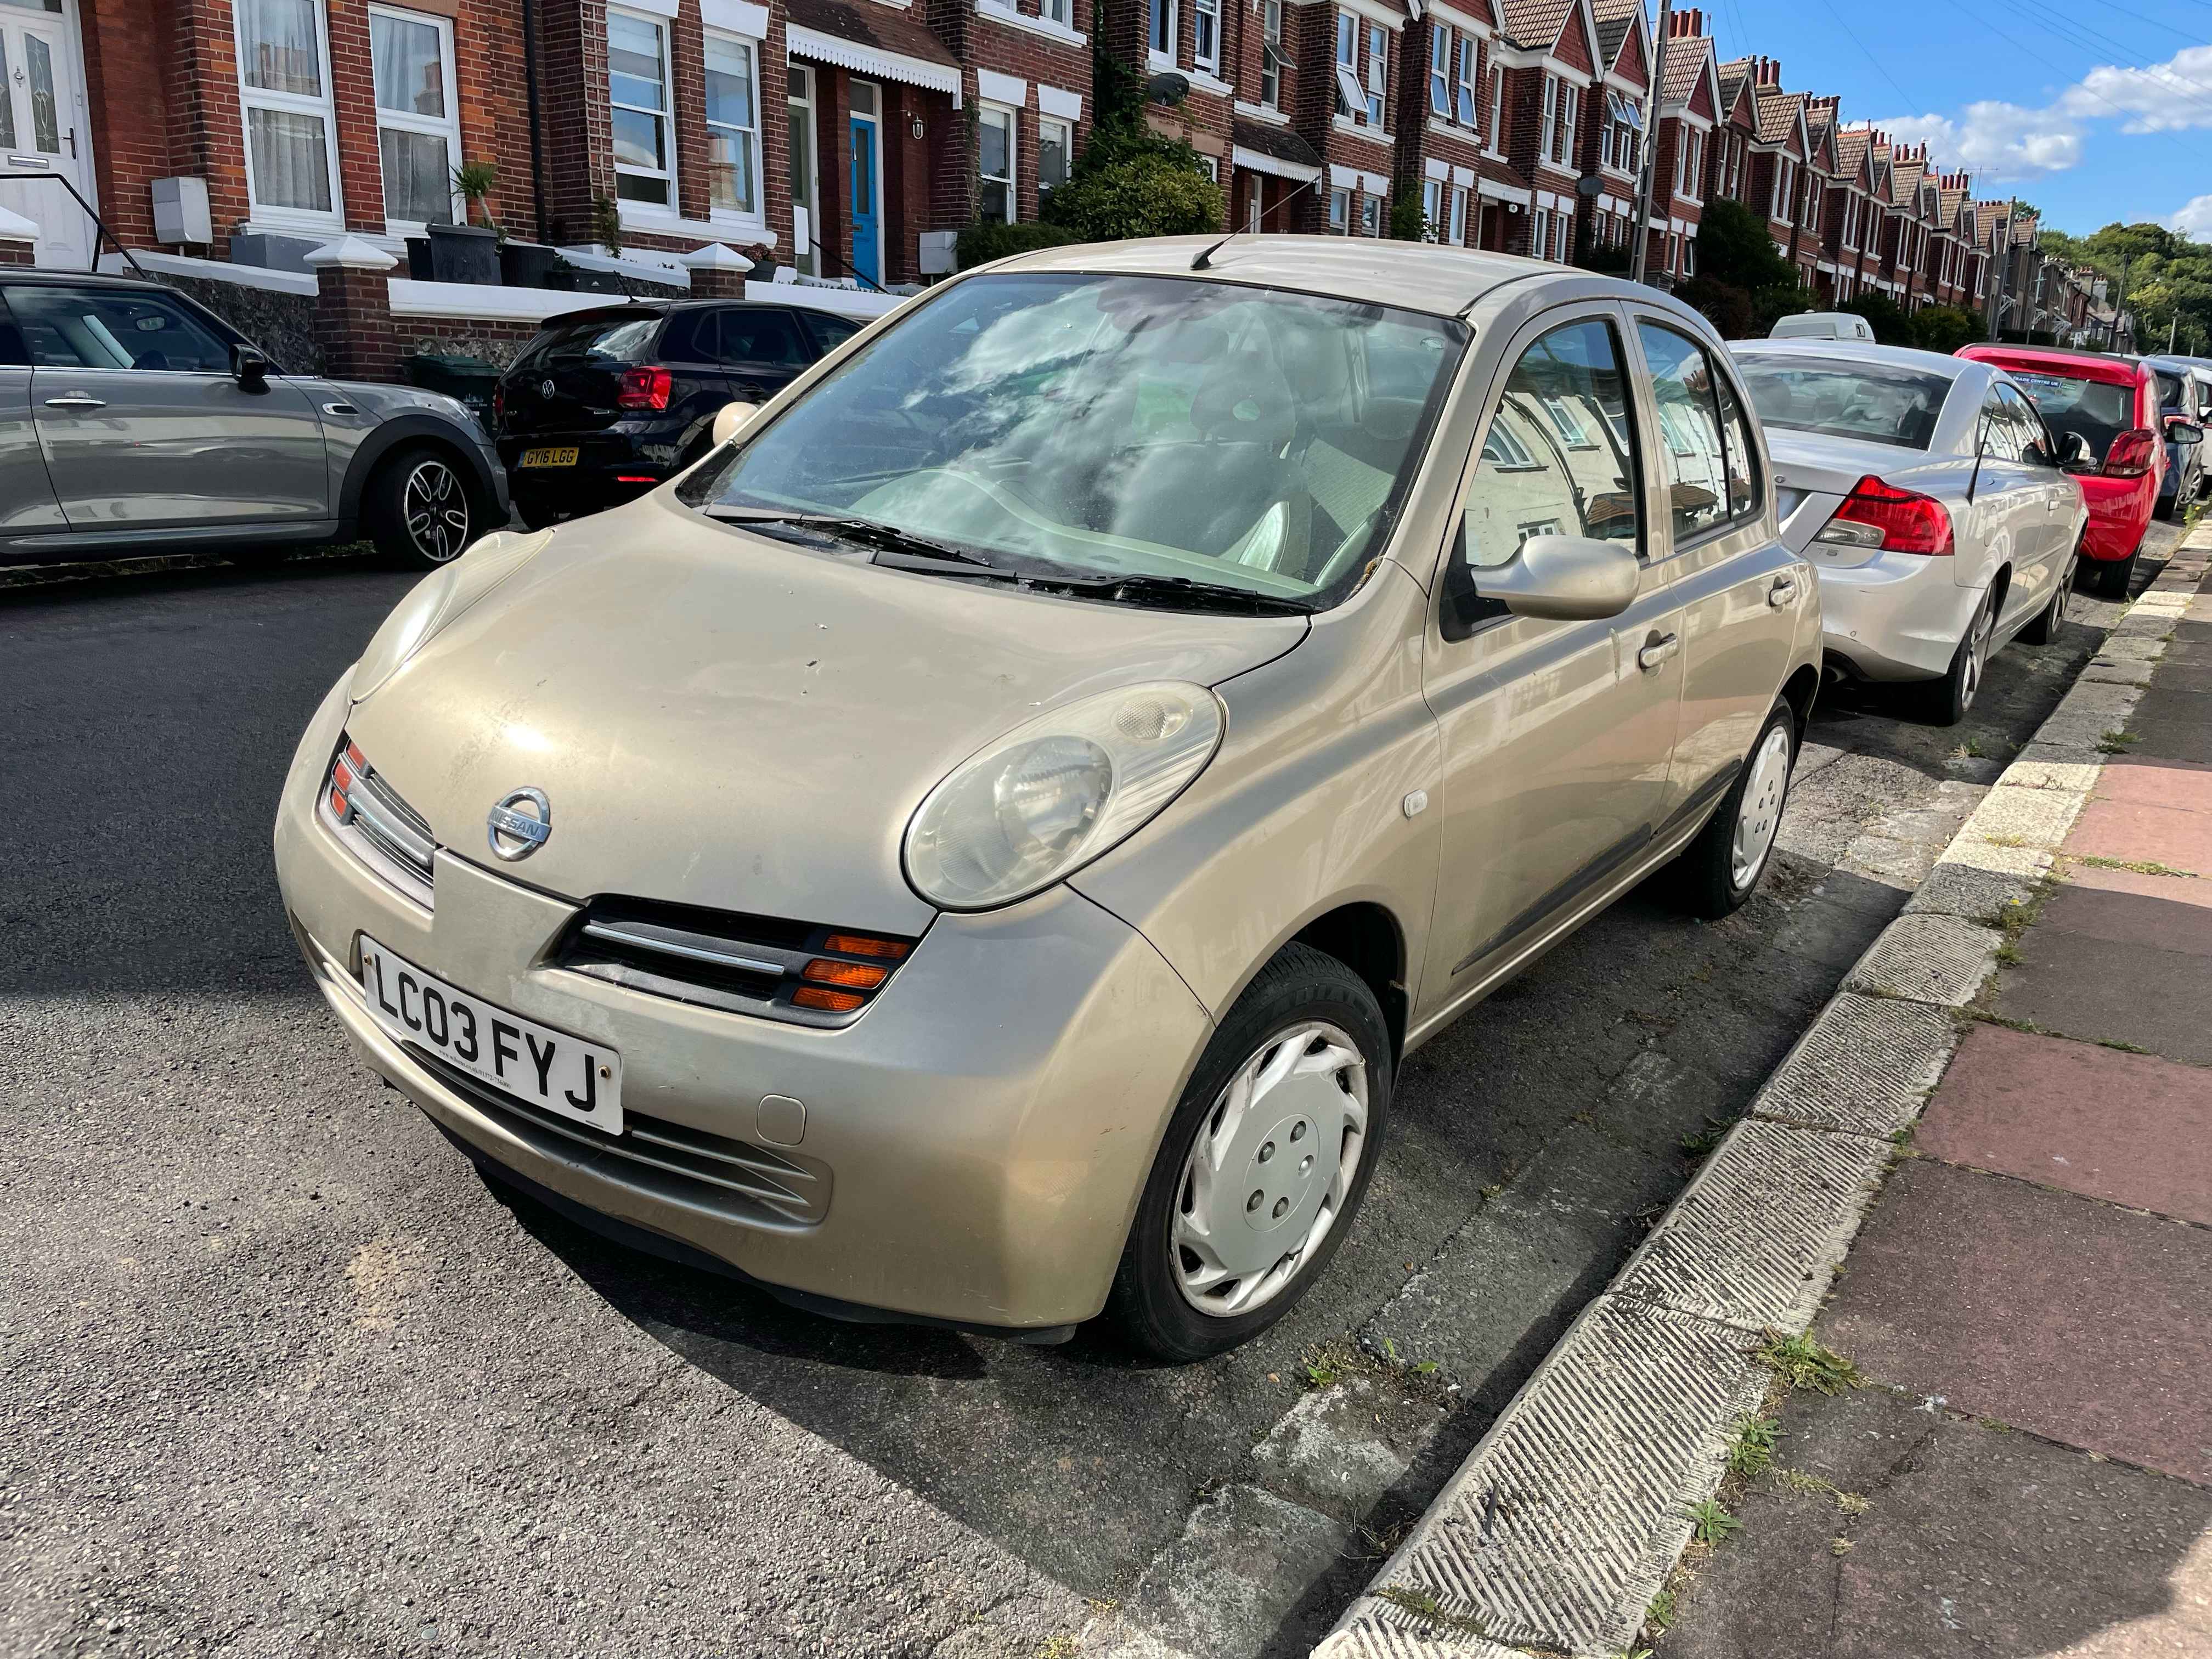 Photograph of LC03 FYJ - a Gold Nissan Micra parked in Hollingdean by a non-resident, and potentially abandoned. The second of seventeen photographs supplied by the residents of Hollingdean.